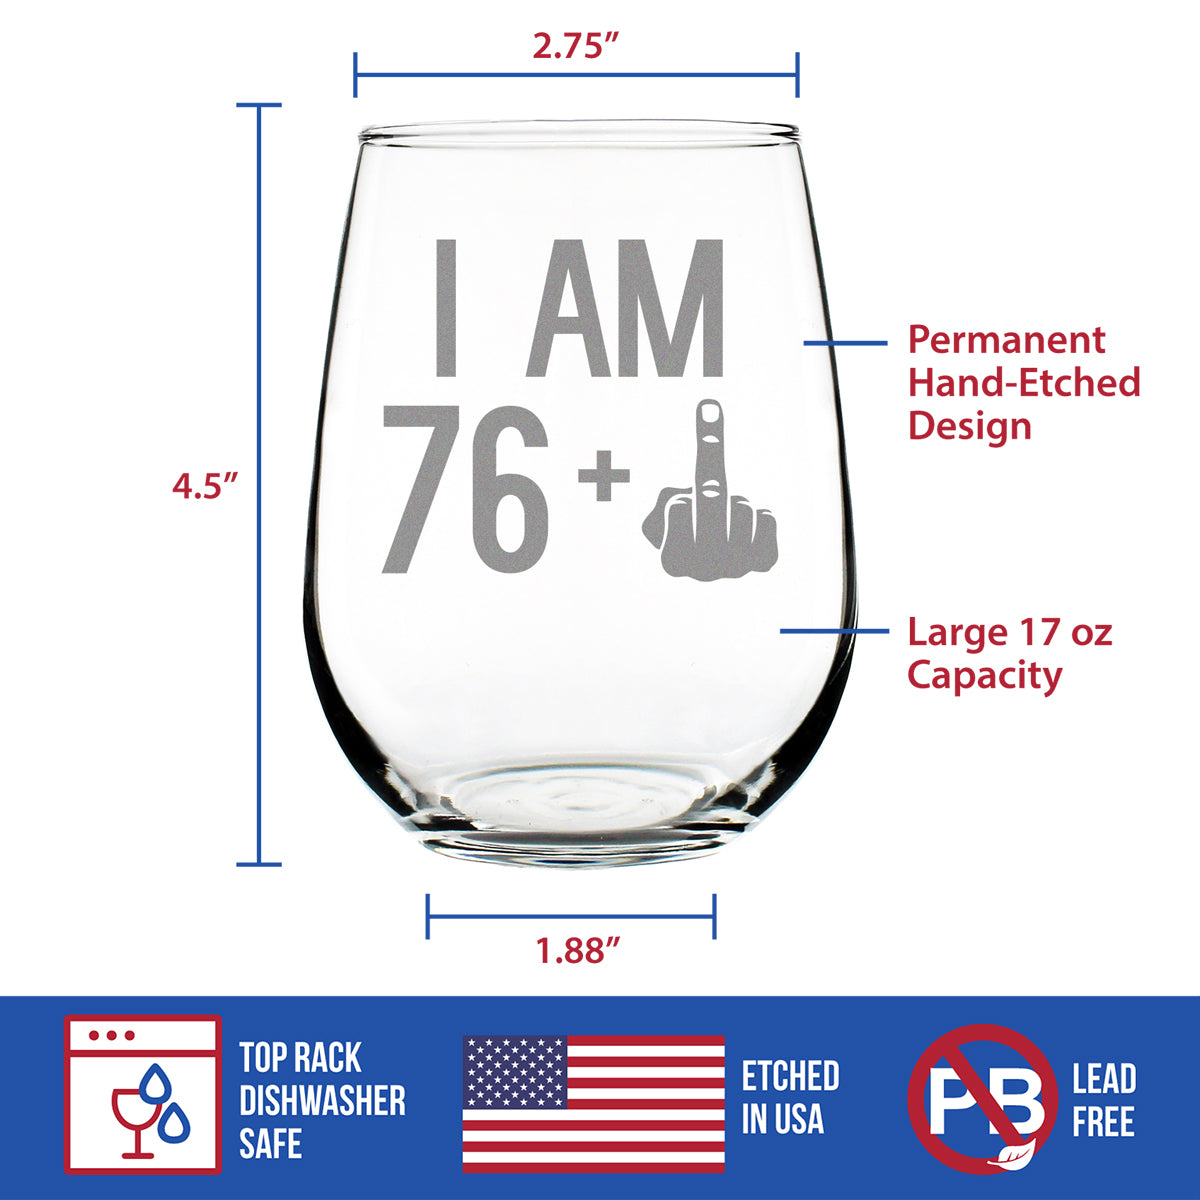 76 + 1 Middle Finger - 77th Birthday Stemless Wine Glass for Women &amp; Men - Cute Funny Wine Gift Idea - Unique Personalized Bday Glasses for Mom, Dad, Friend Turning 77 - Drinking Party Decoration